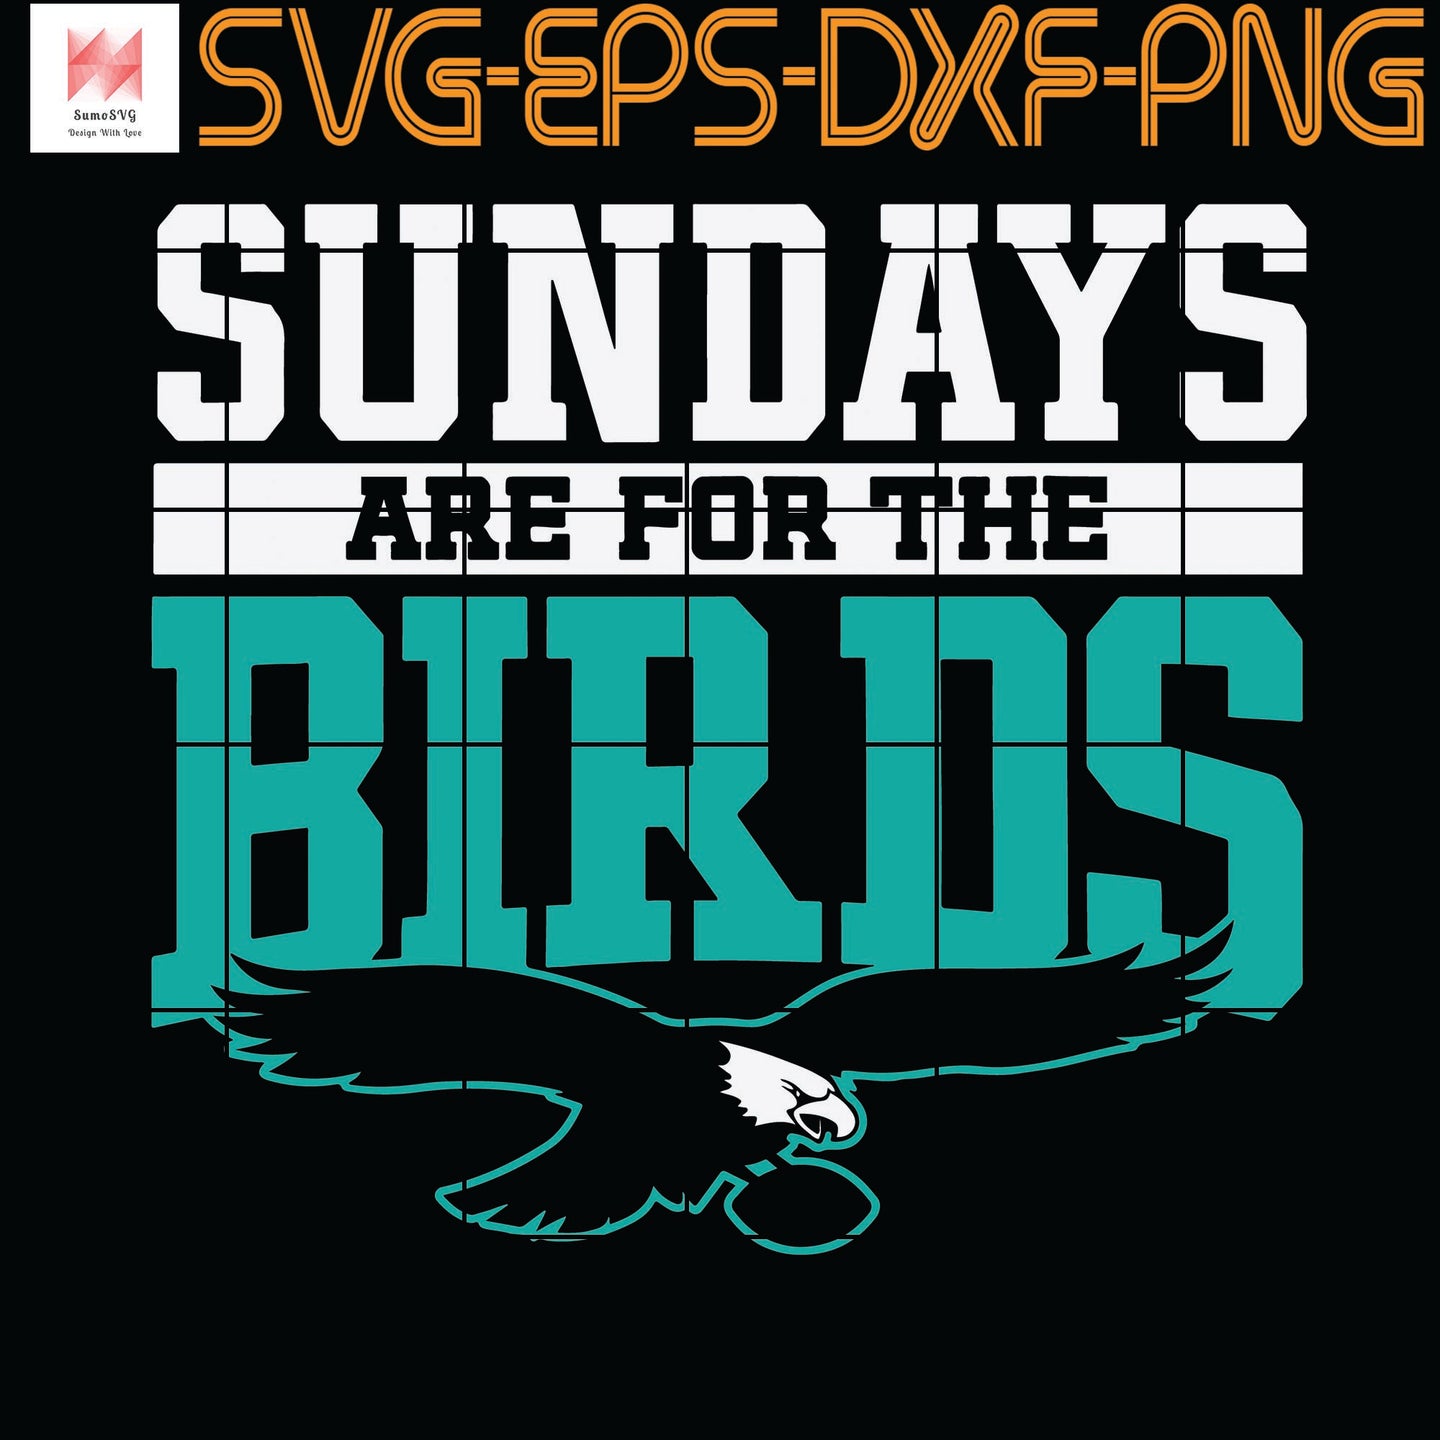 Download Sundays Are For The Birds Eagle Quotes Funny Quotes Cameo Cricut Sumosvg